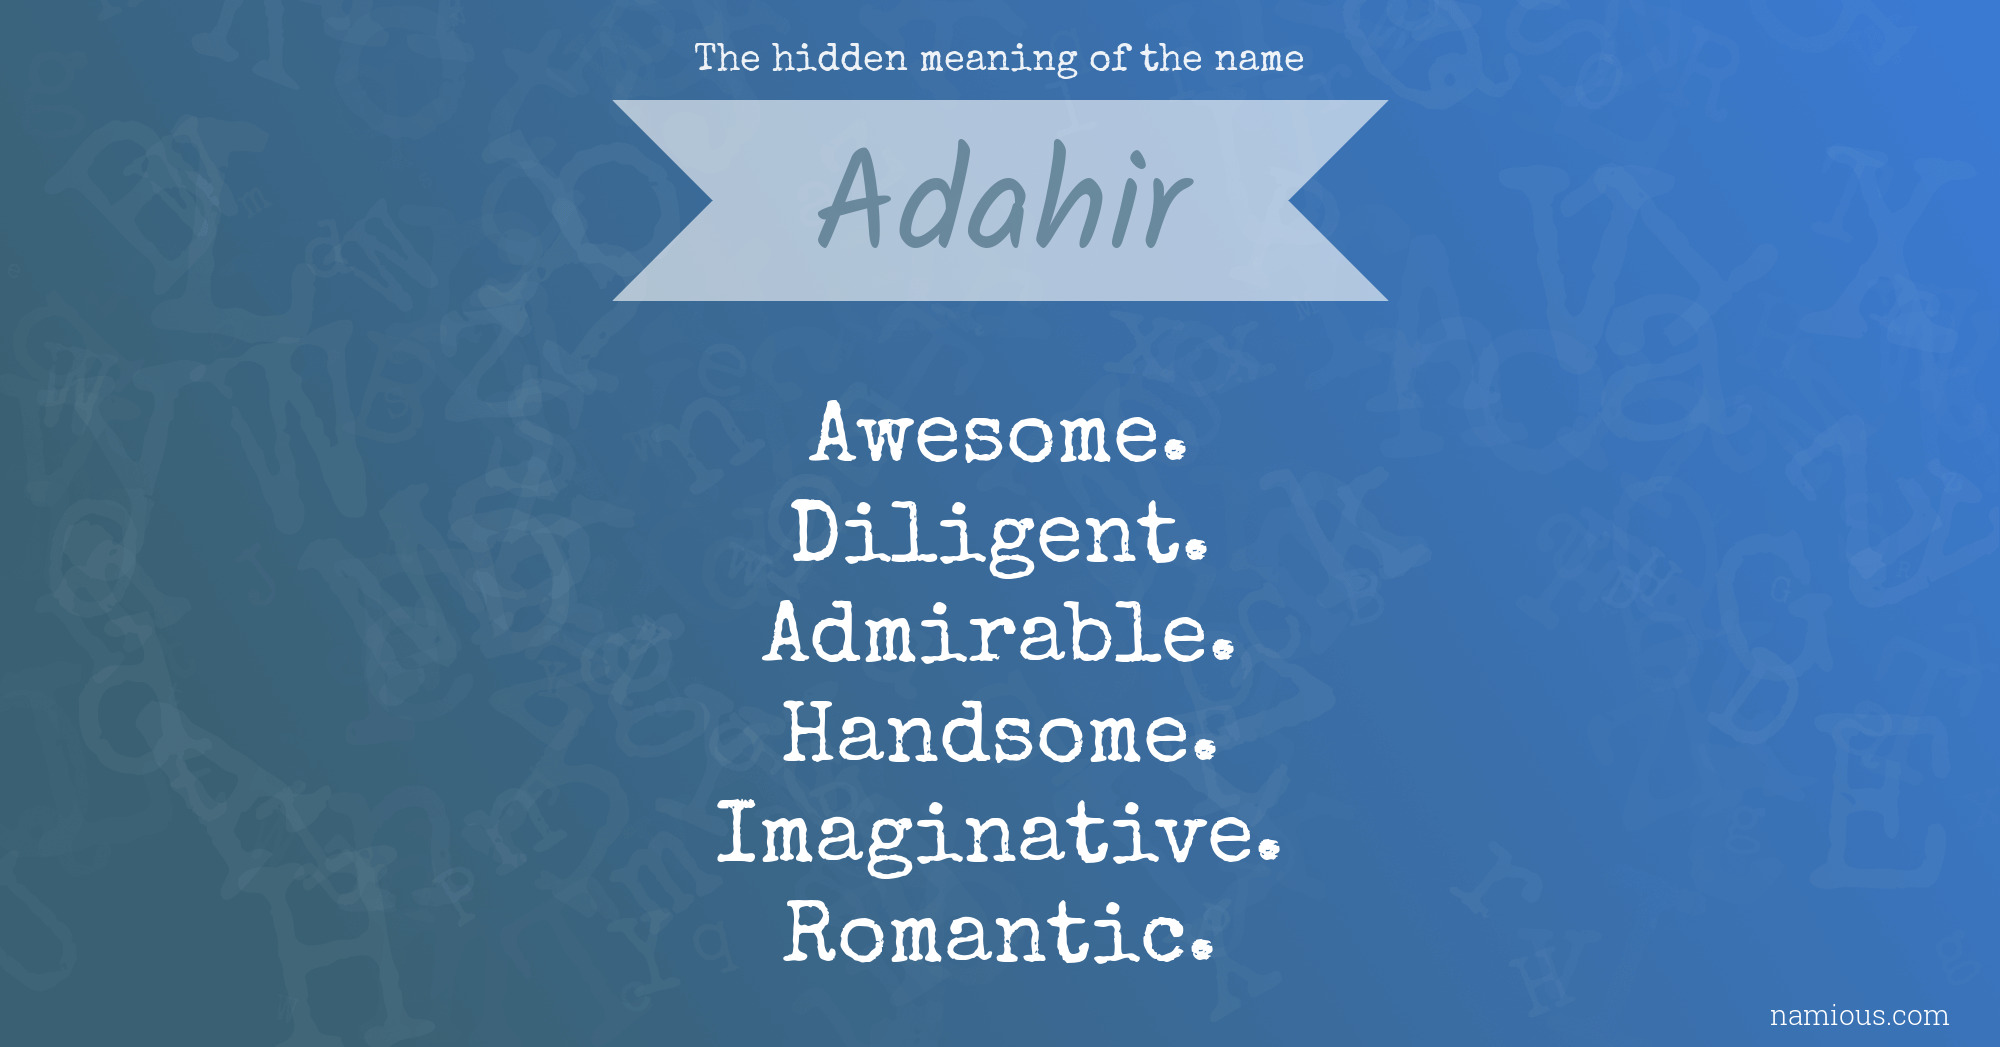 The hidden meaning of the name Adahir